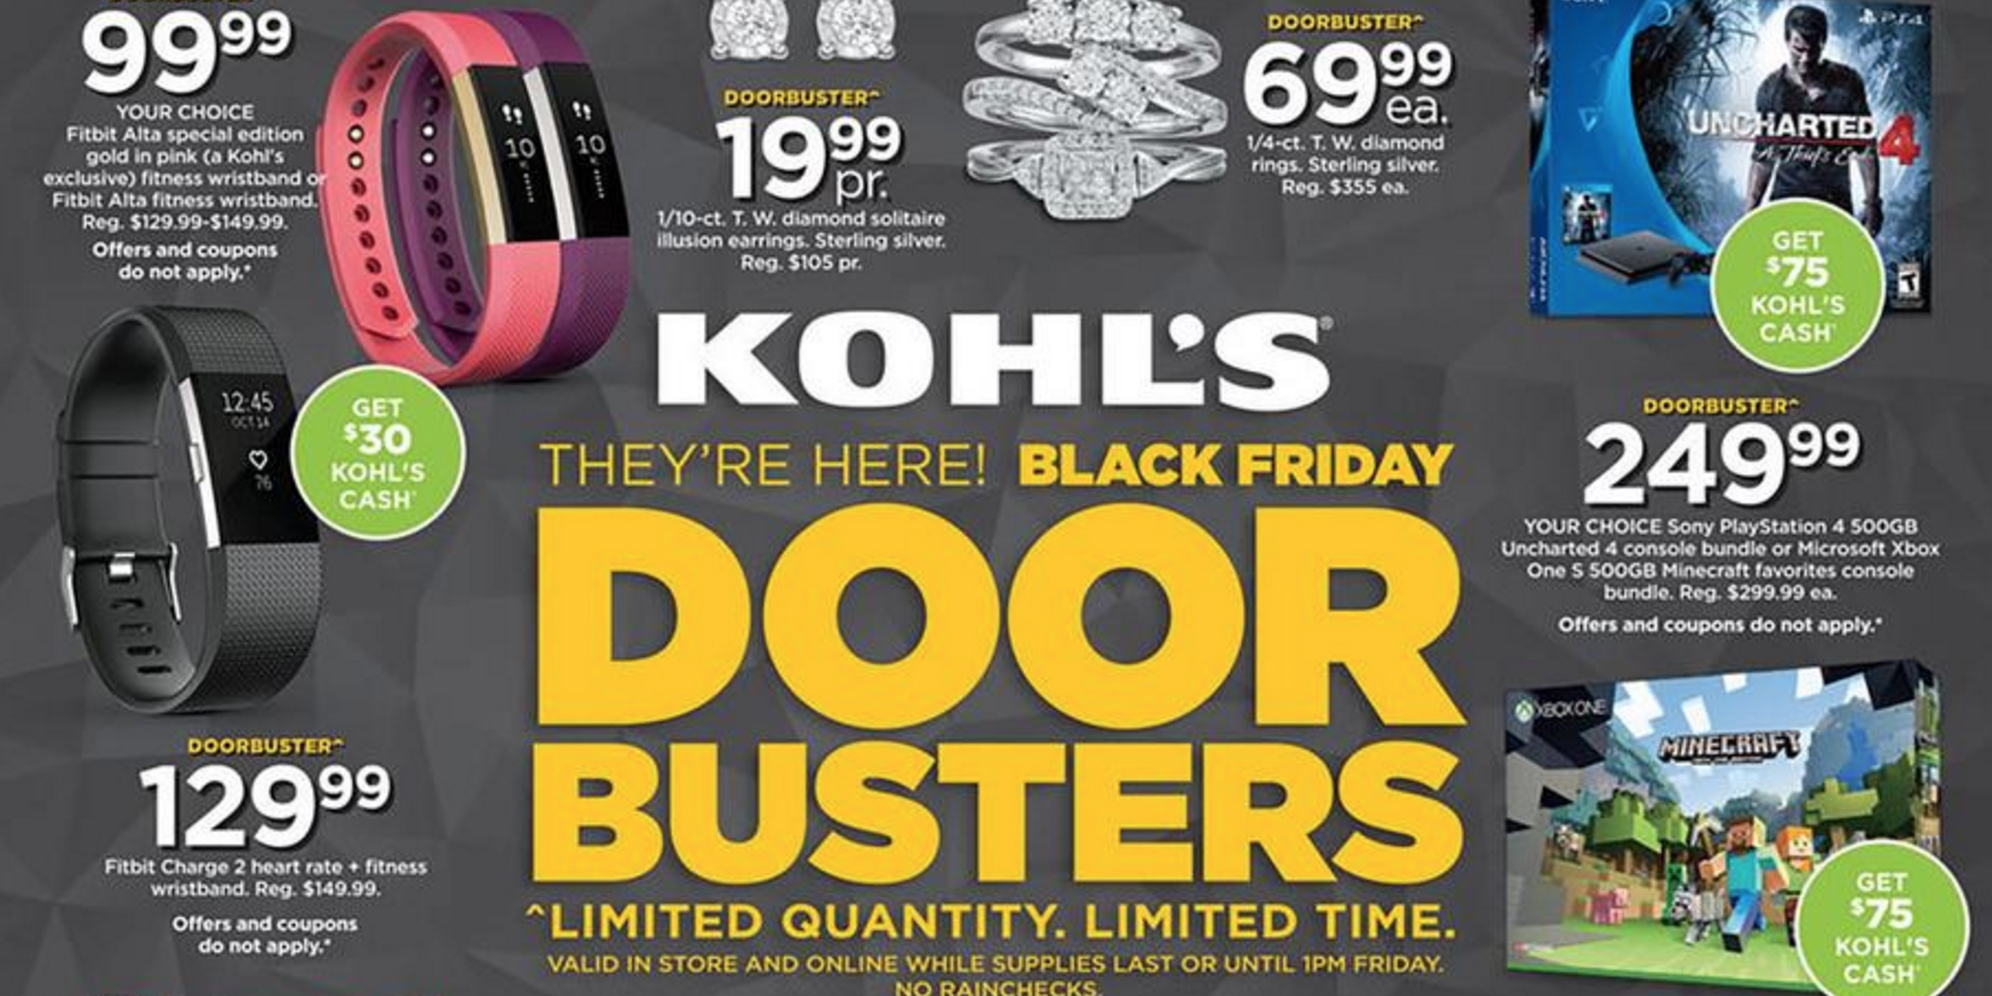 View Kohl's Black Friday ad for 2014; deals kick off at 6 p.m. on  Thanksgiving